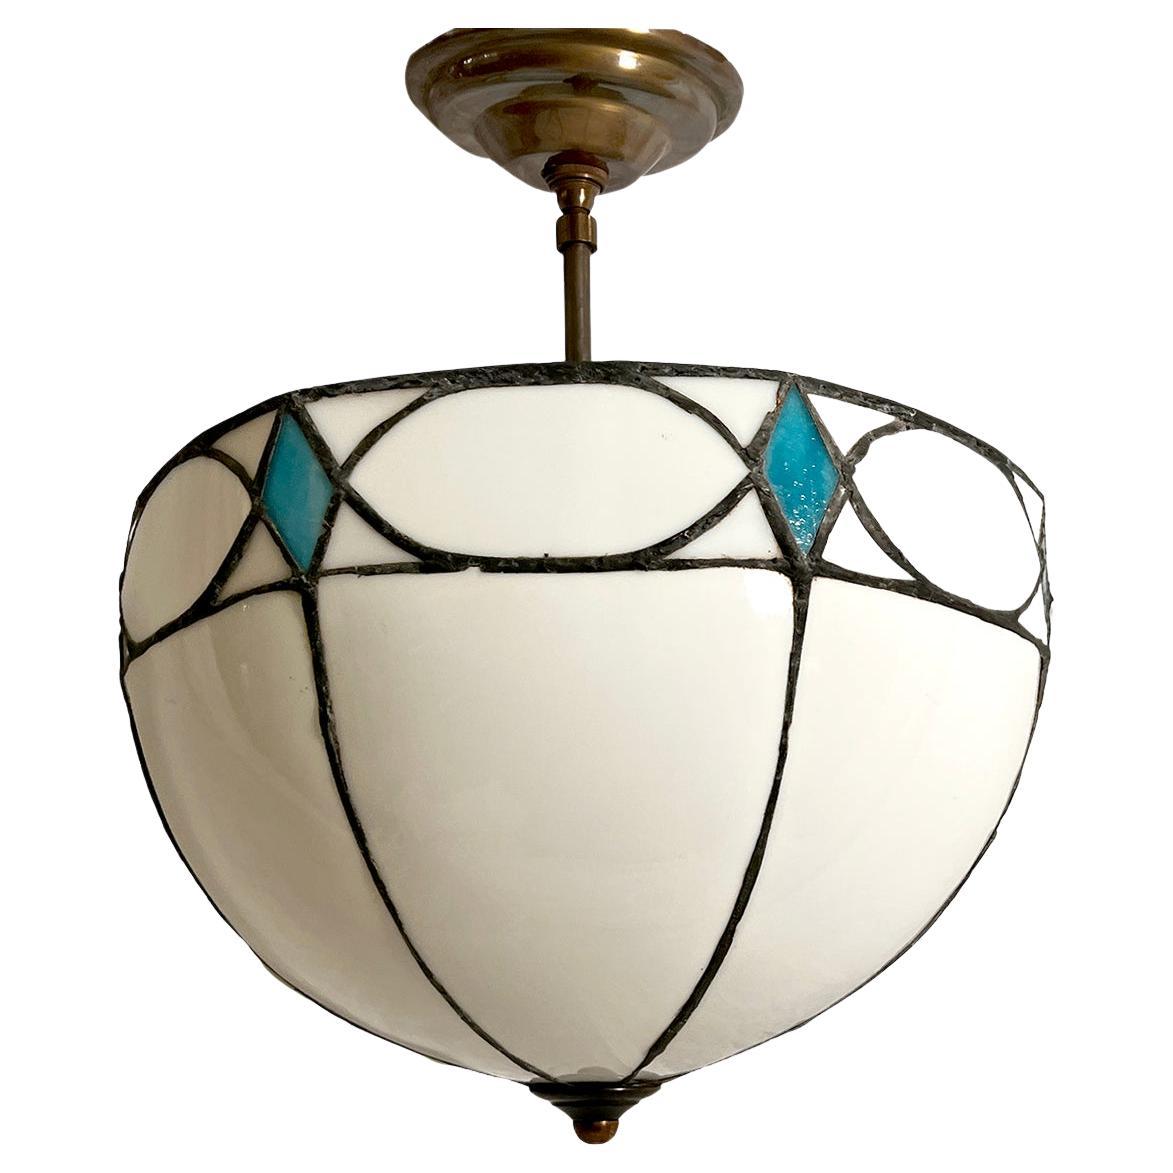 Set of Leaded Glass Light Fixtures, Sold Individually